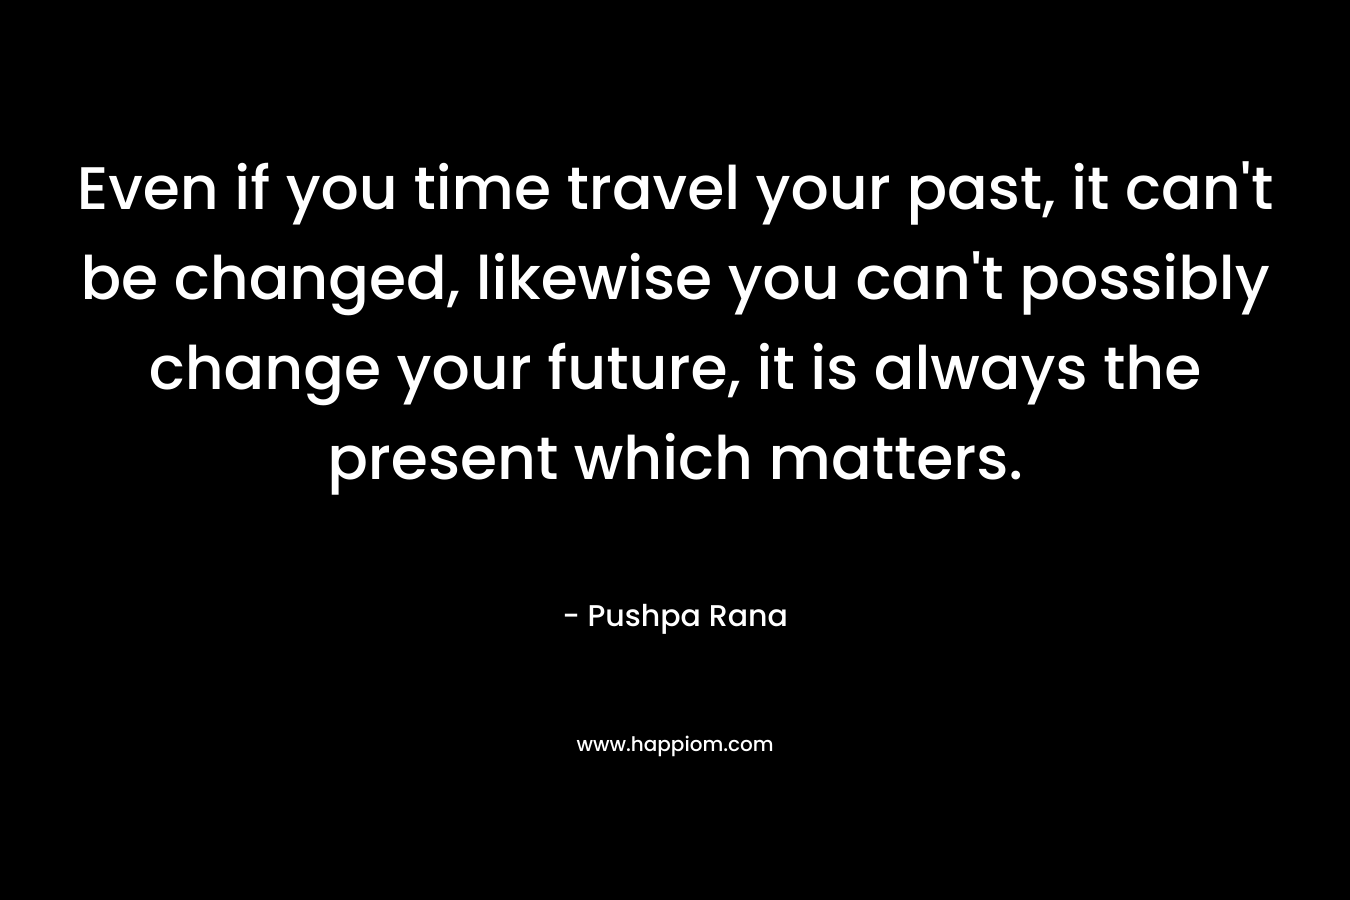 Even if you time travel your past, it can’t be changed, likewise you can’t possibly change your future, it is always the present which matters. – Pushpa Rana